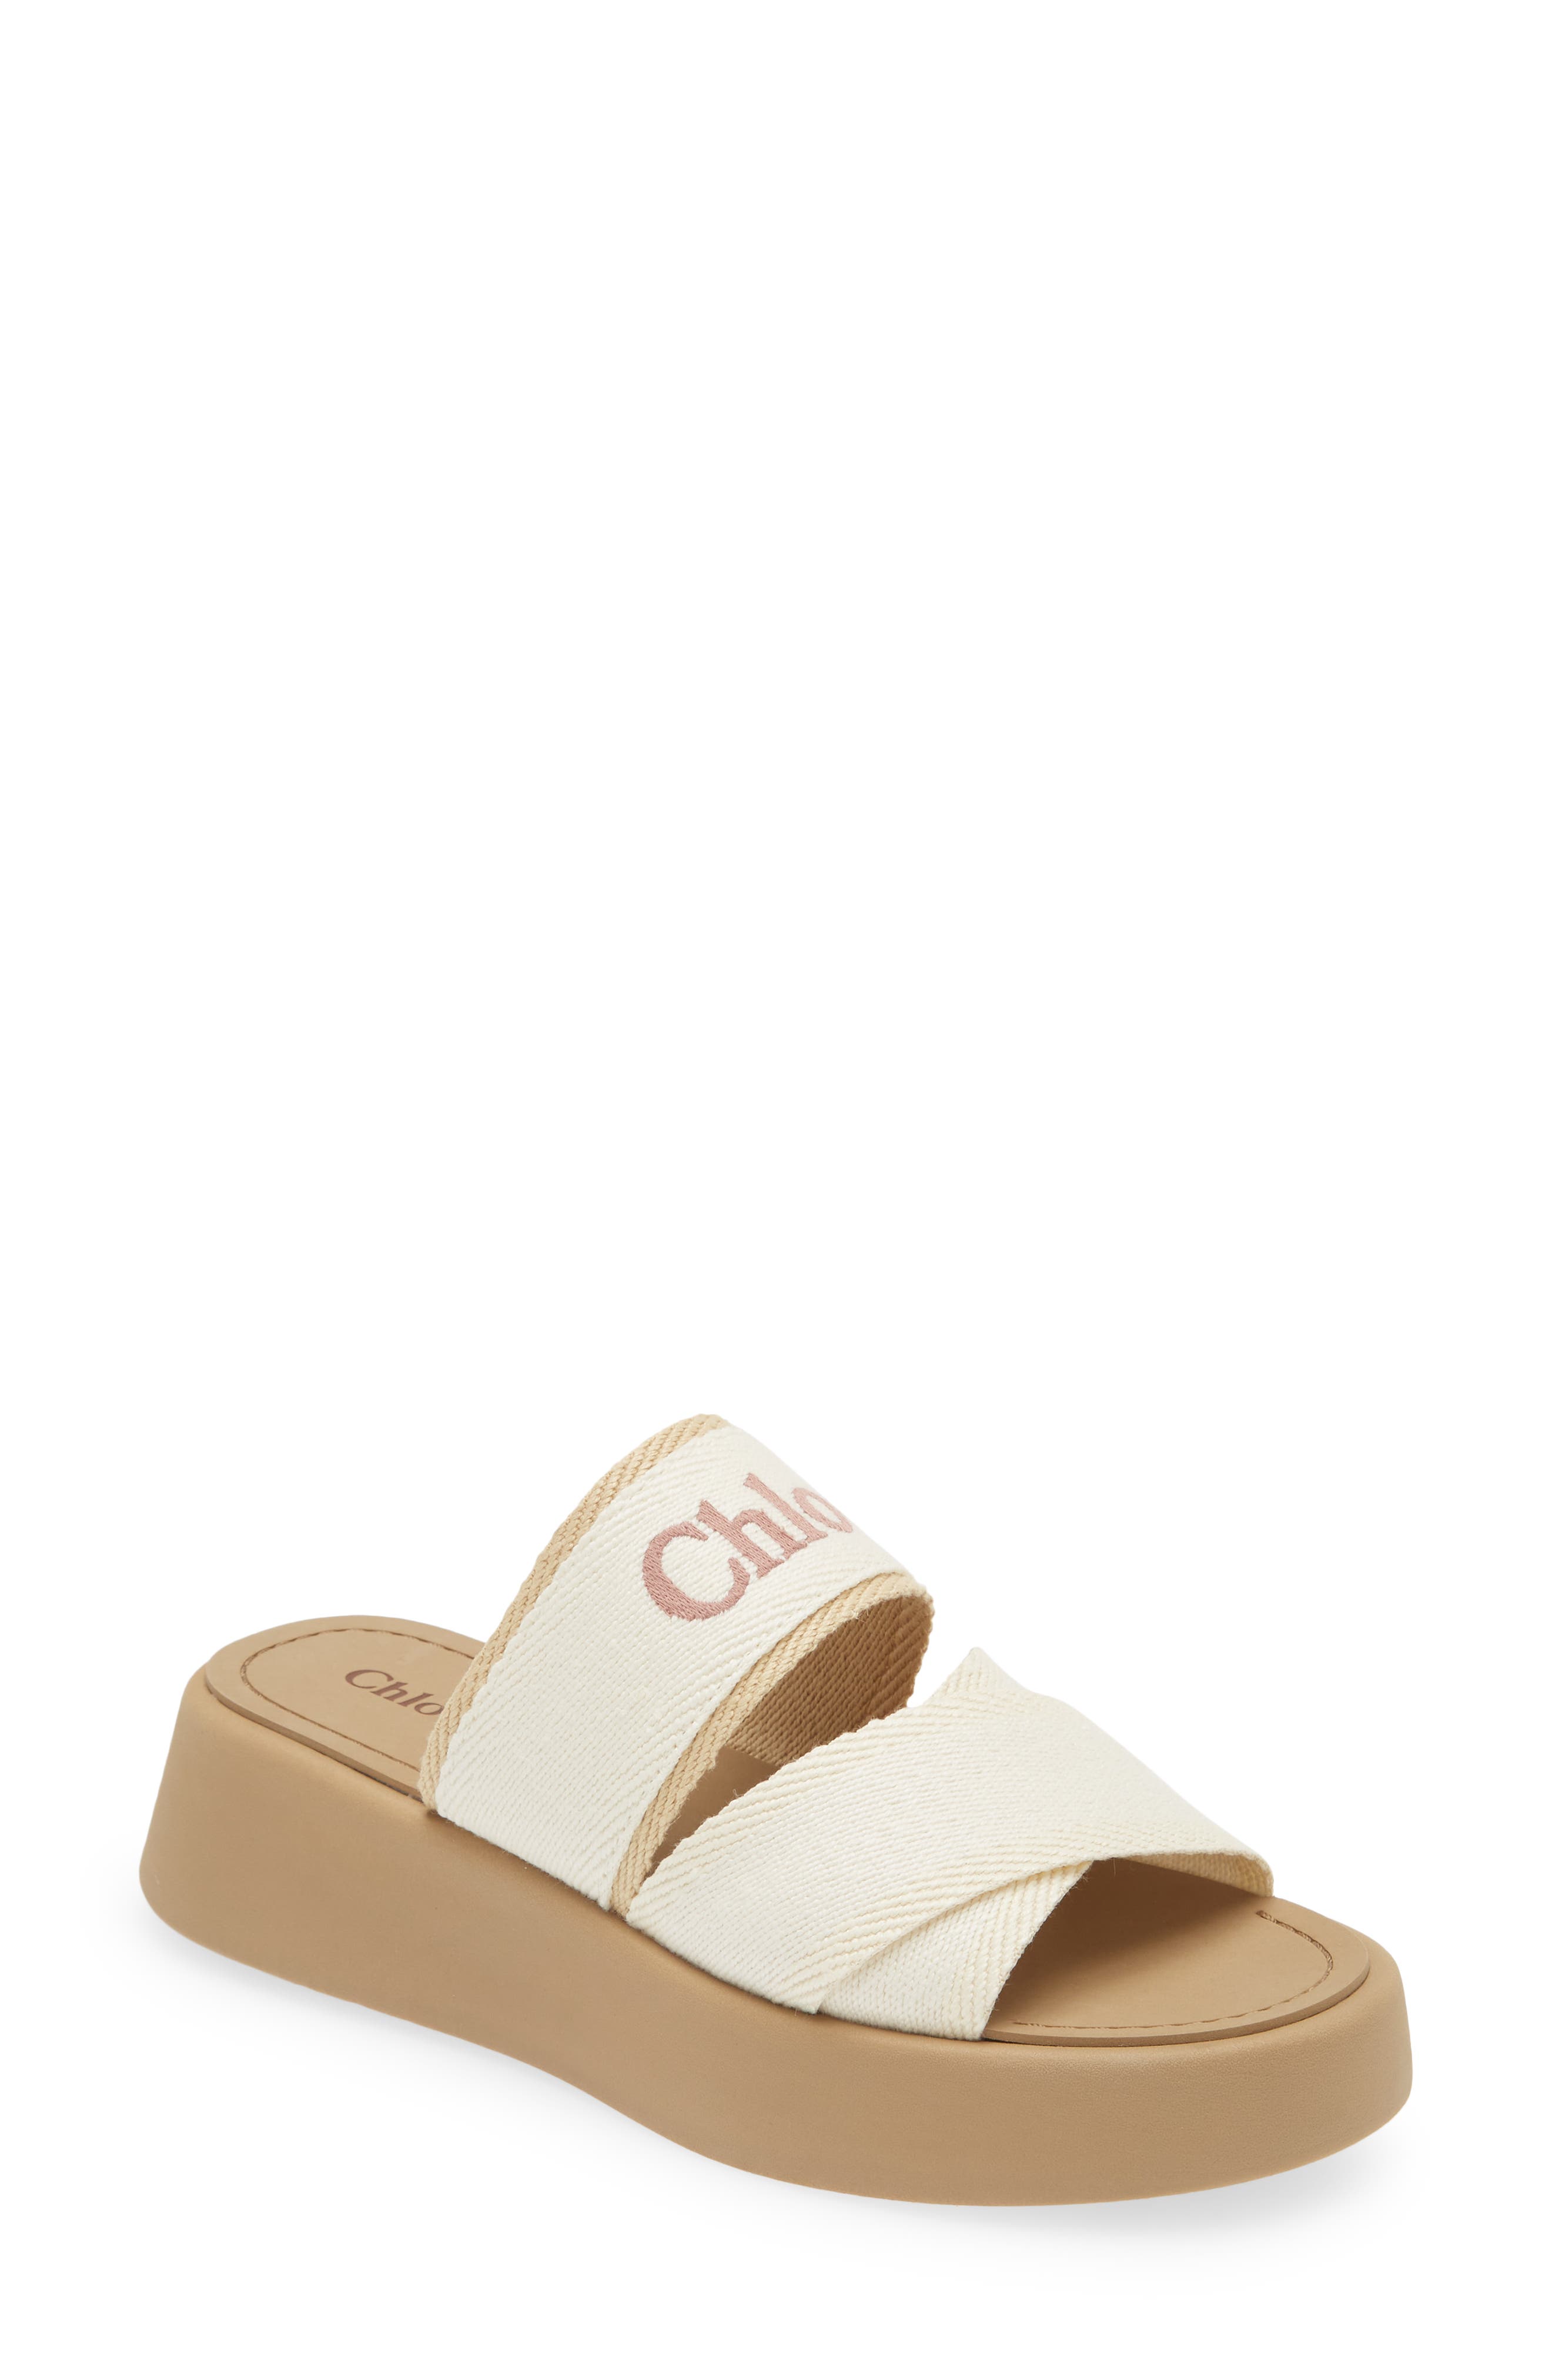 Chloe Woody Canvas Espadrille Mules in Pink